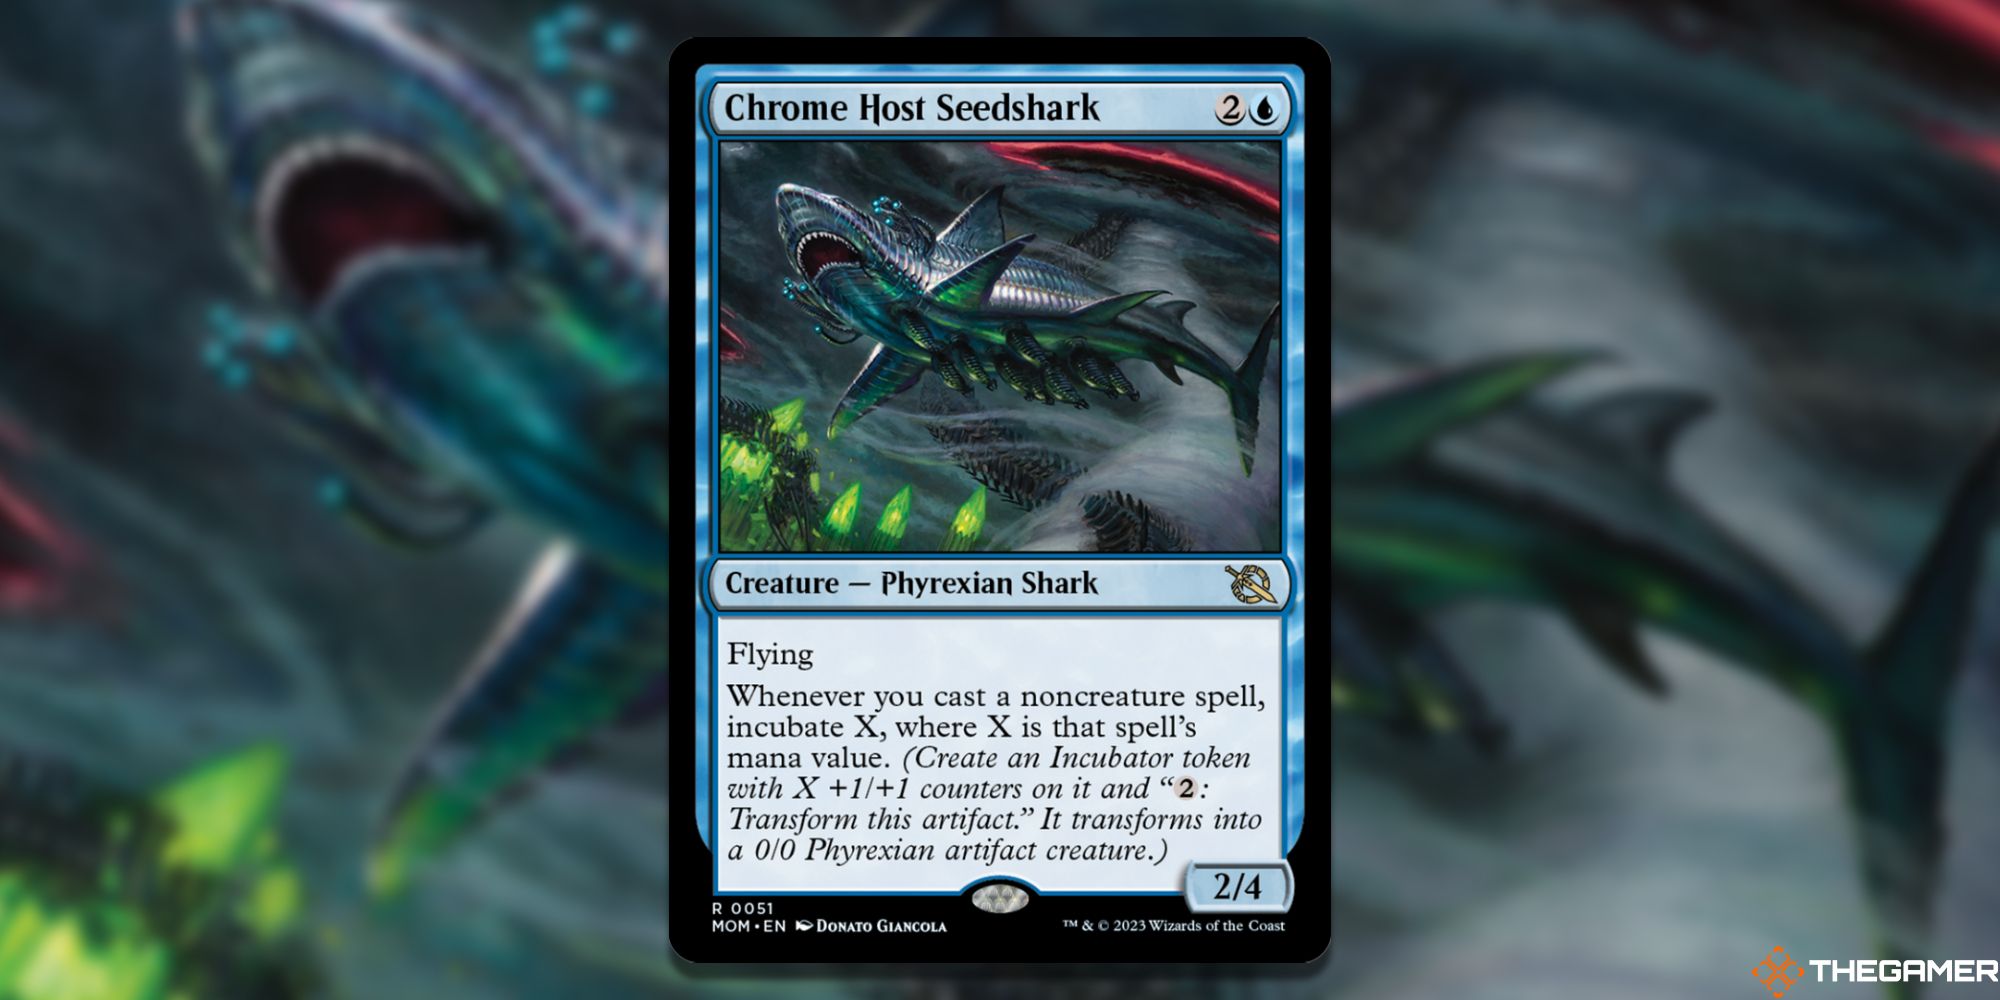 Chrome-hosted Seedshark card image from Magic: The Gathering, with art by Donato Giancola